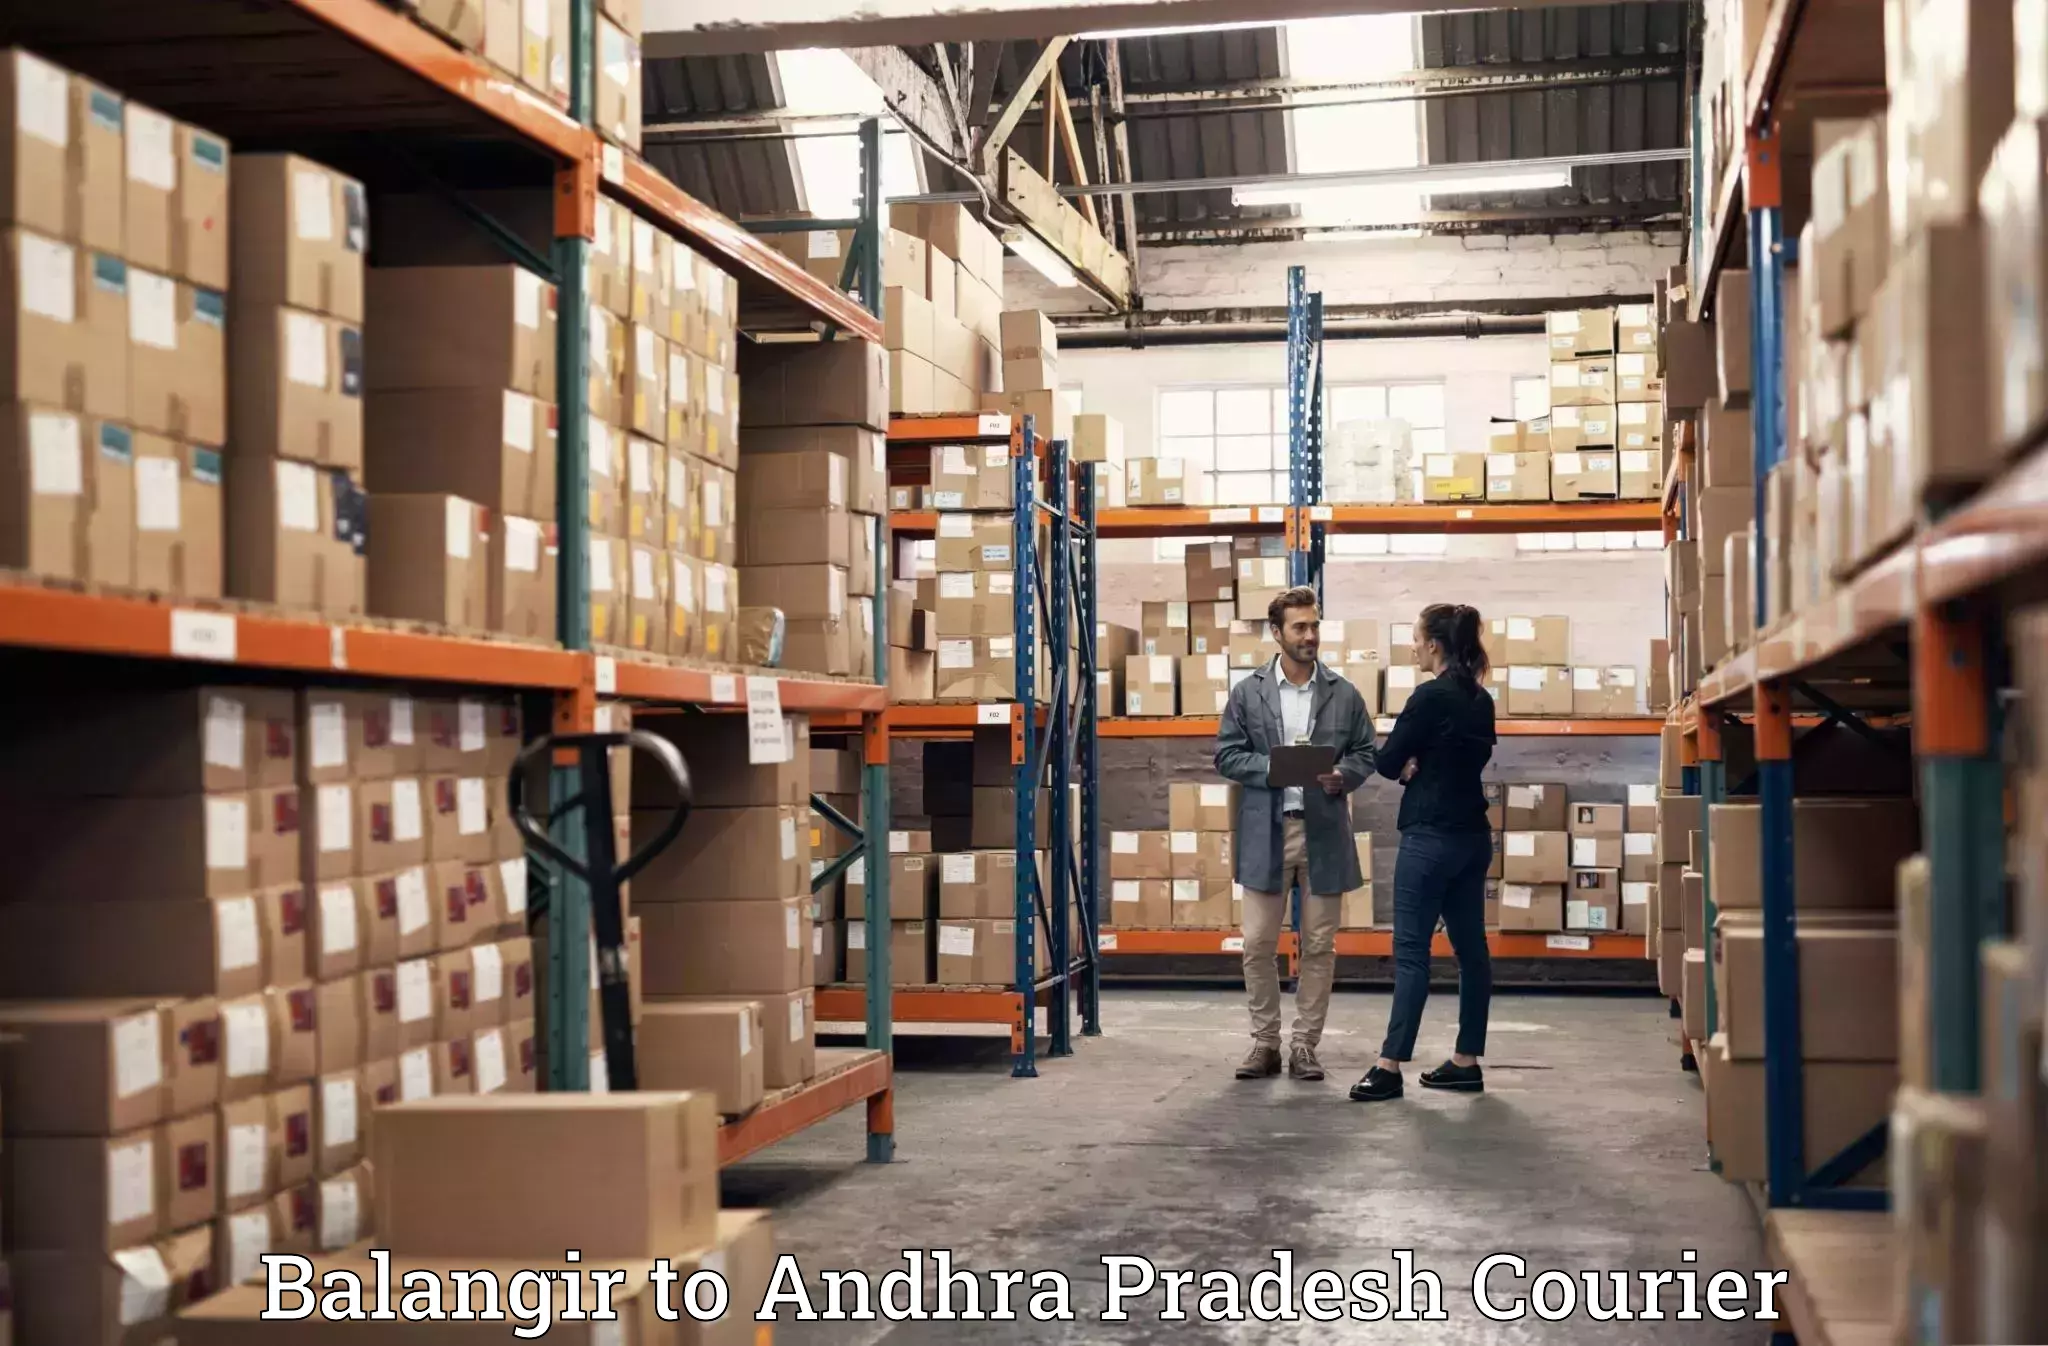 Moving and storage services Balangir to Visakhapatnam